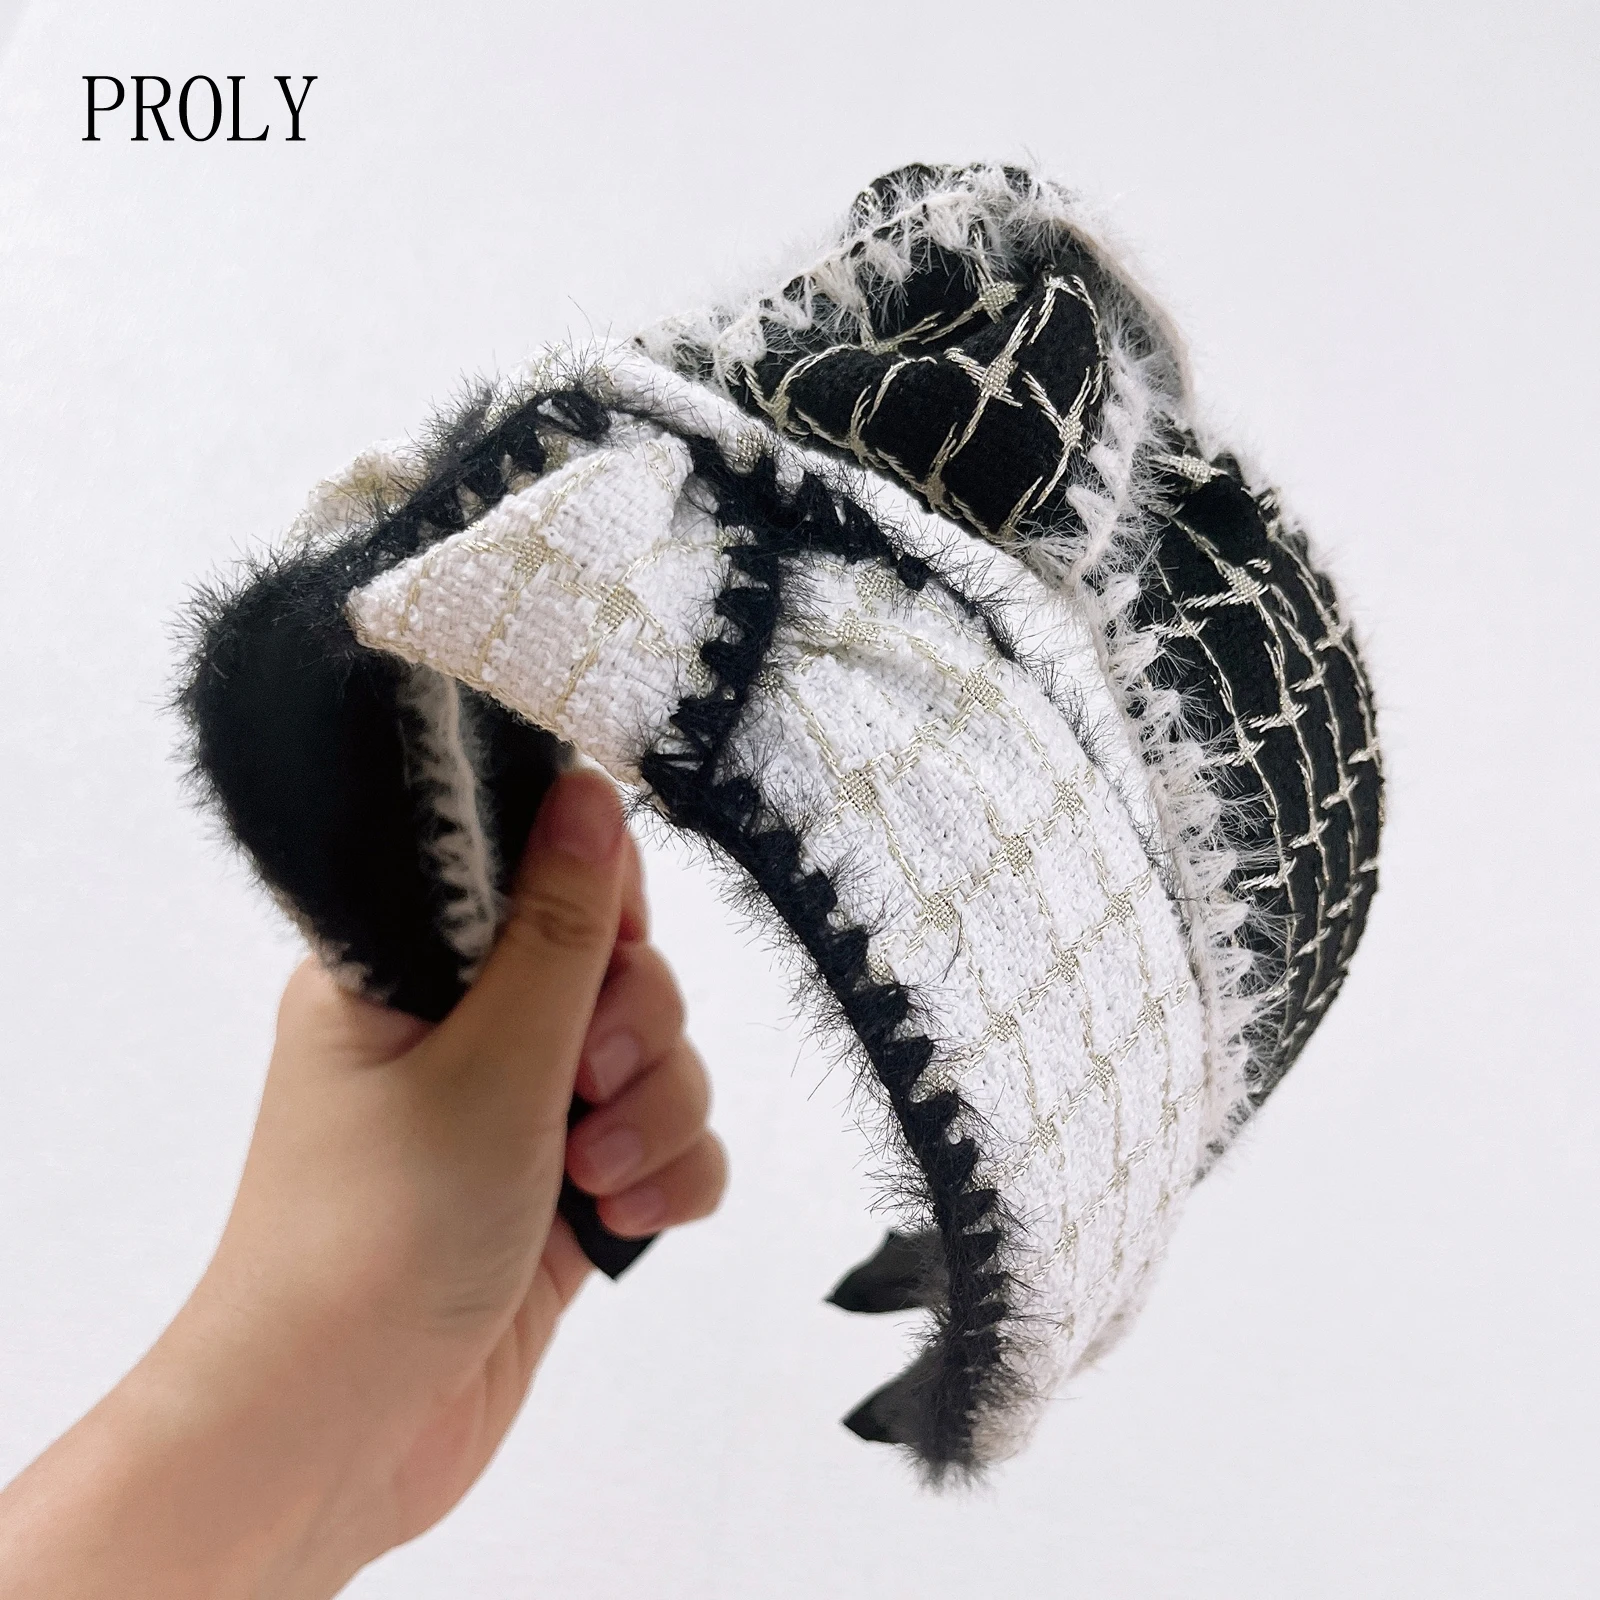 

PROLY New Fashion Hairband For Women Center Knot Warm Plaid Headband Wide Side Classic Turban For Adult Casual Hair Accessories